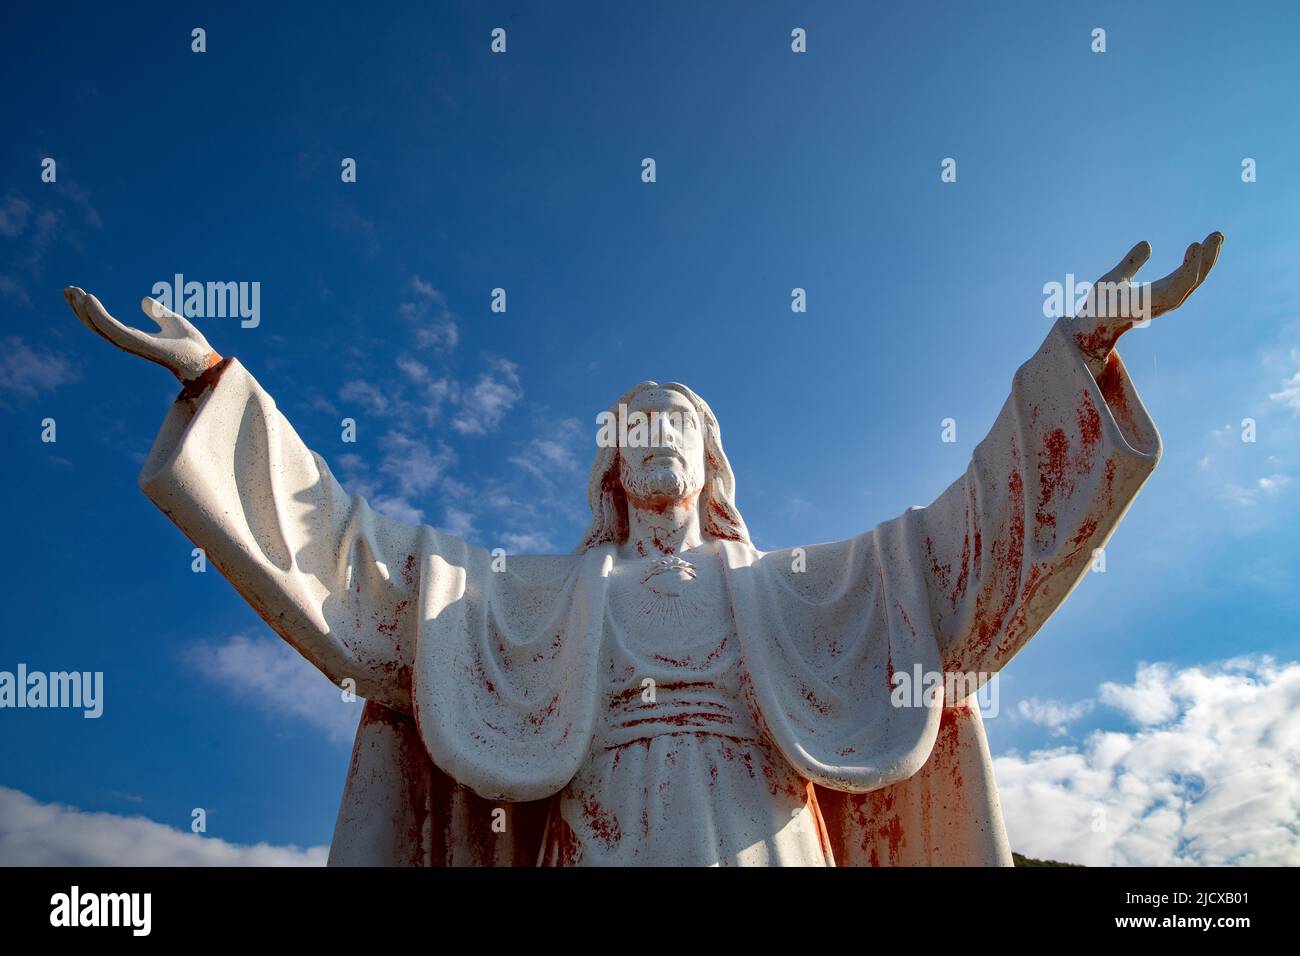 Statue of Jesus Christ with open arms in Delaj, Montenegro, Europe Stock Photo